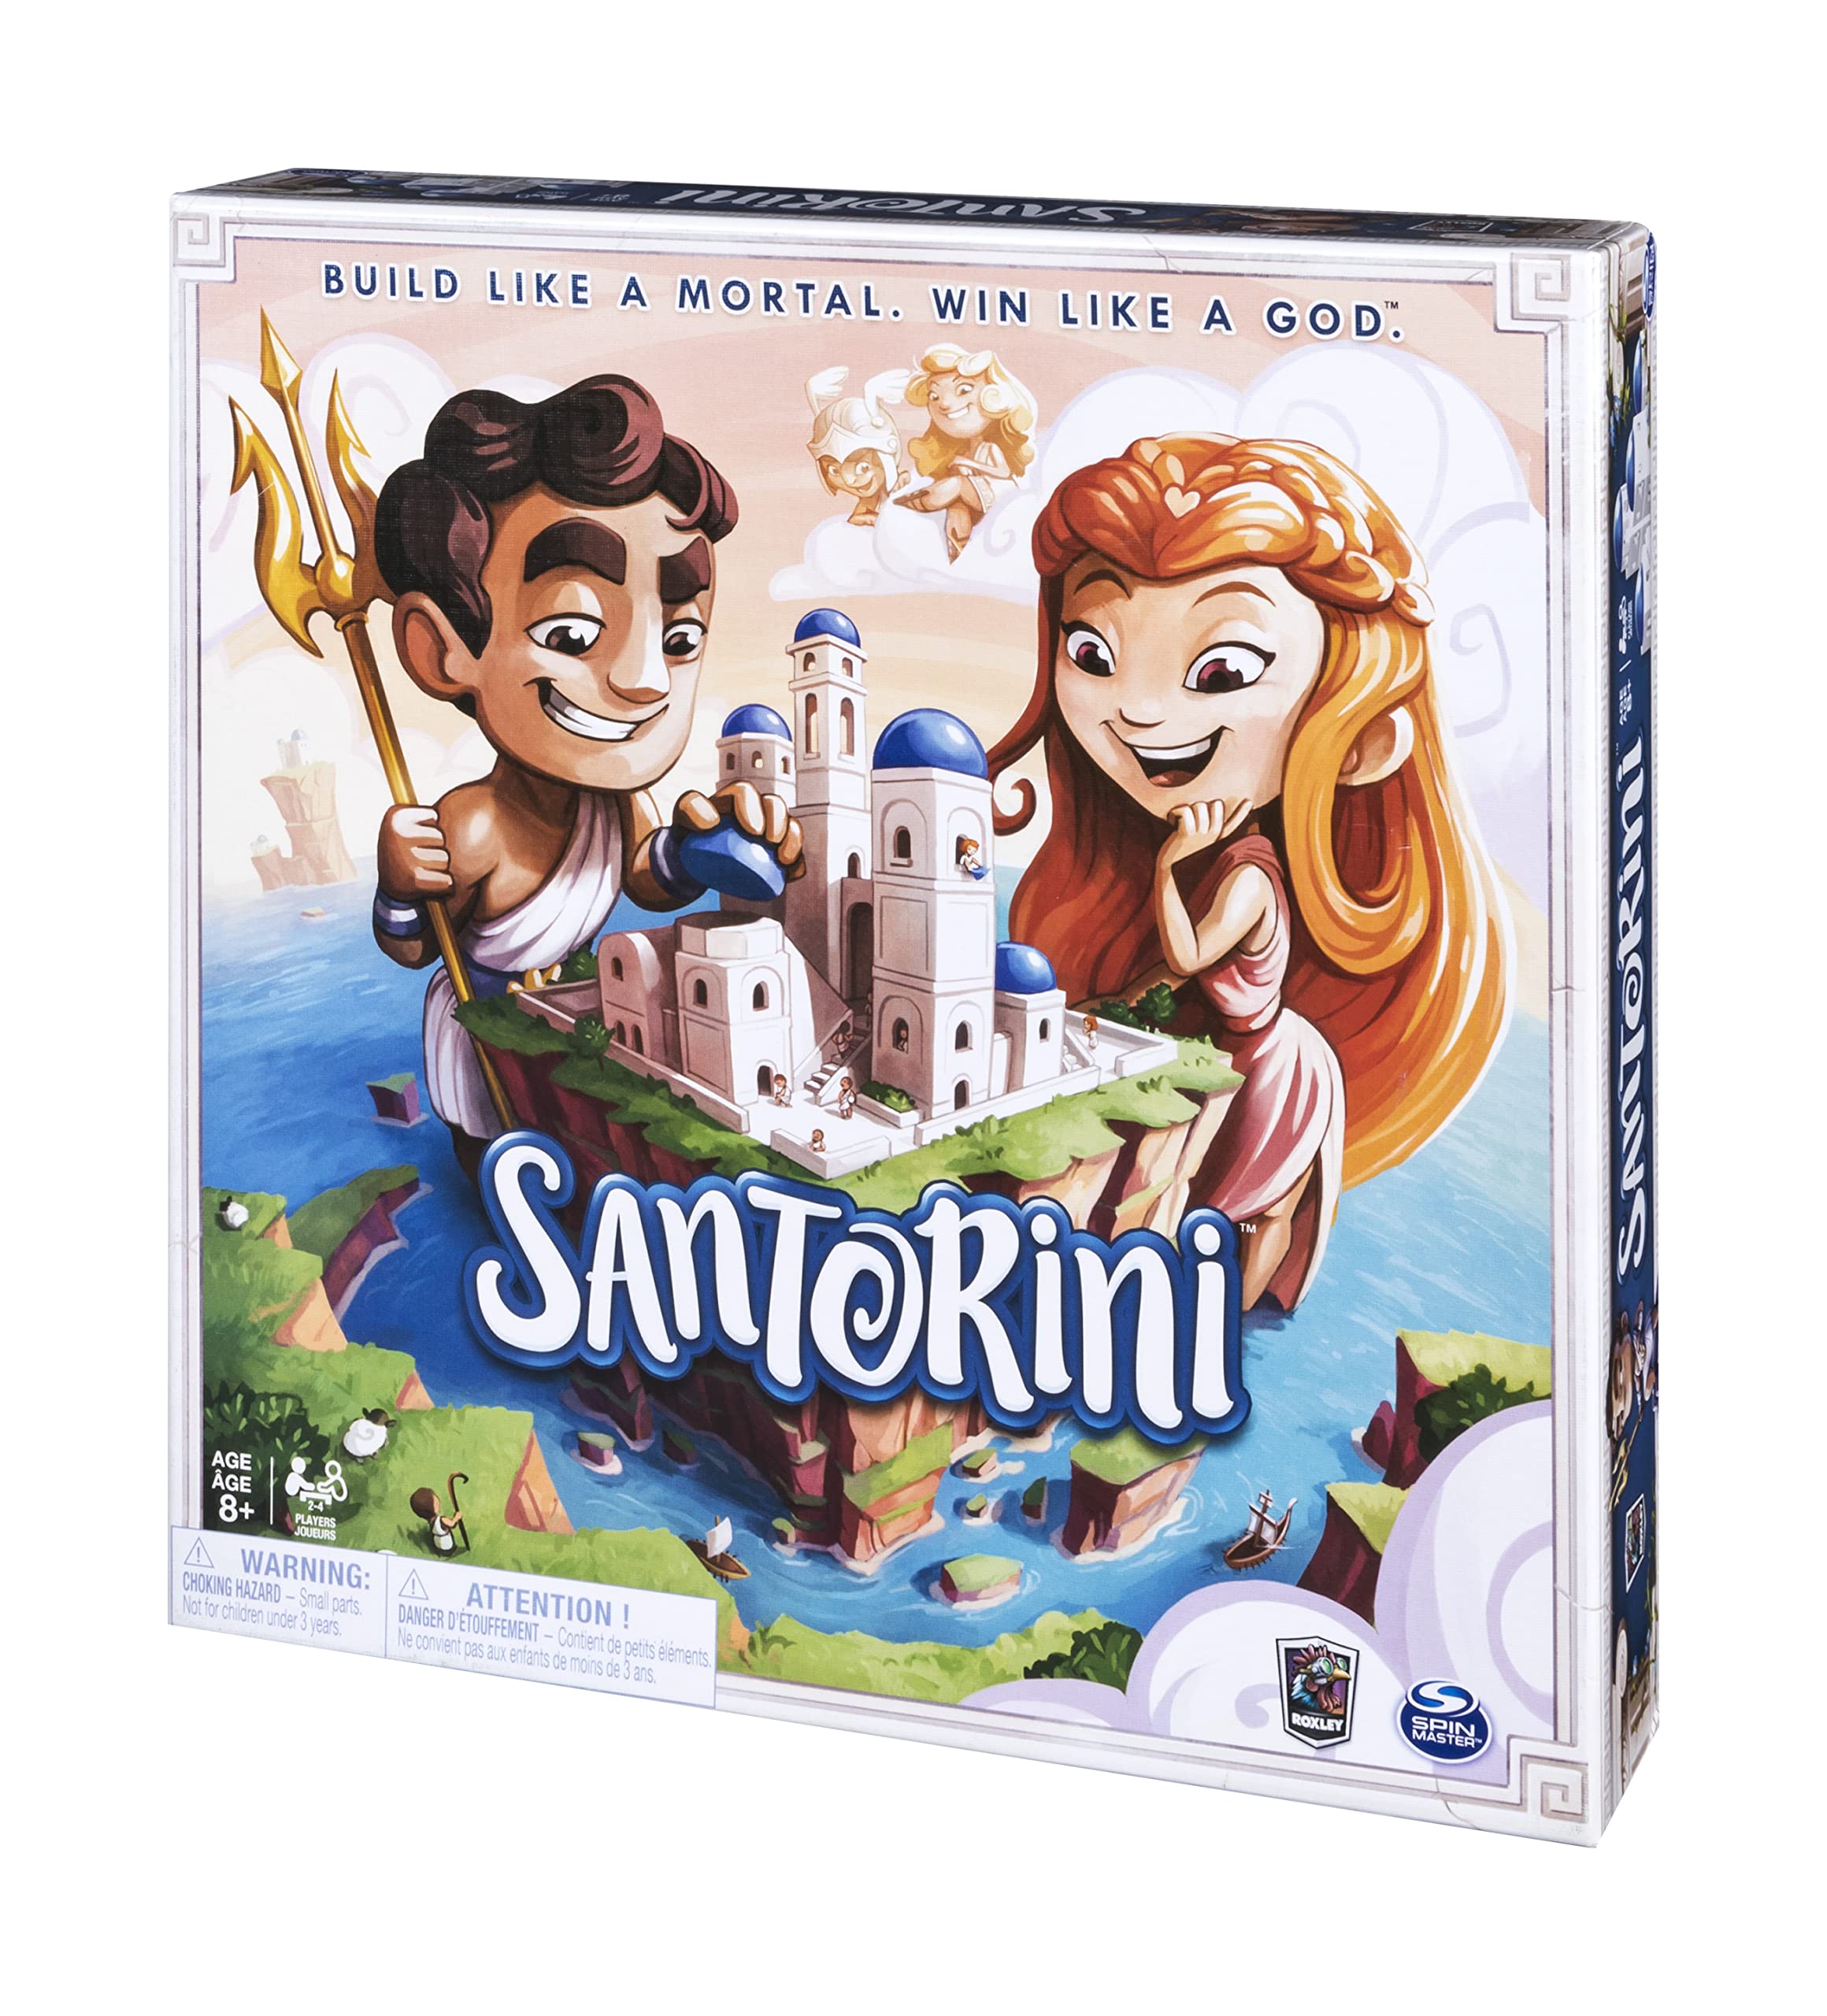 Spin Master Santorini, Strategy Family Board Game 2-4 Players Classic Fun Building Greek Mythology Card Game, for Kids and Adults Ages 8 and Up